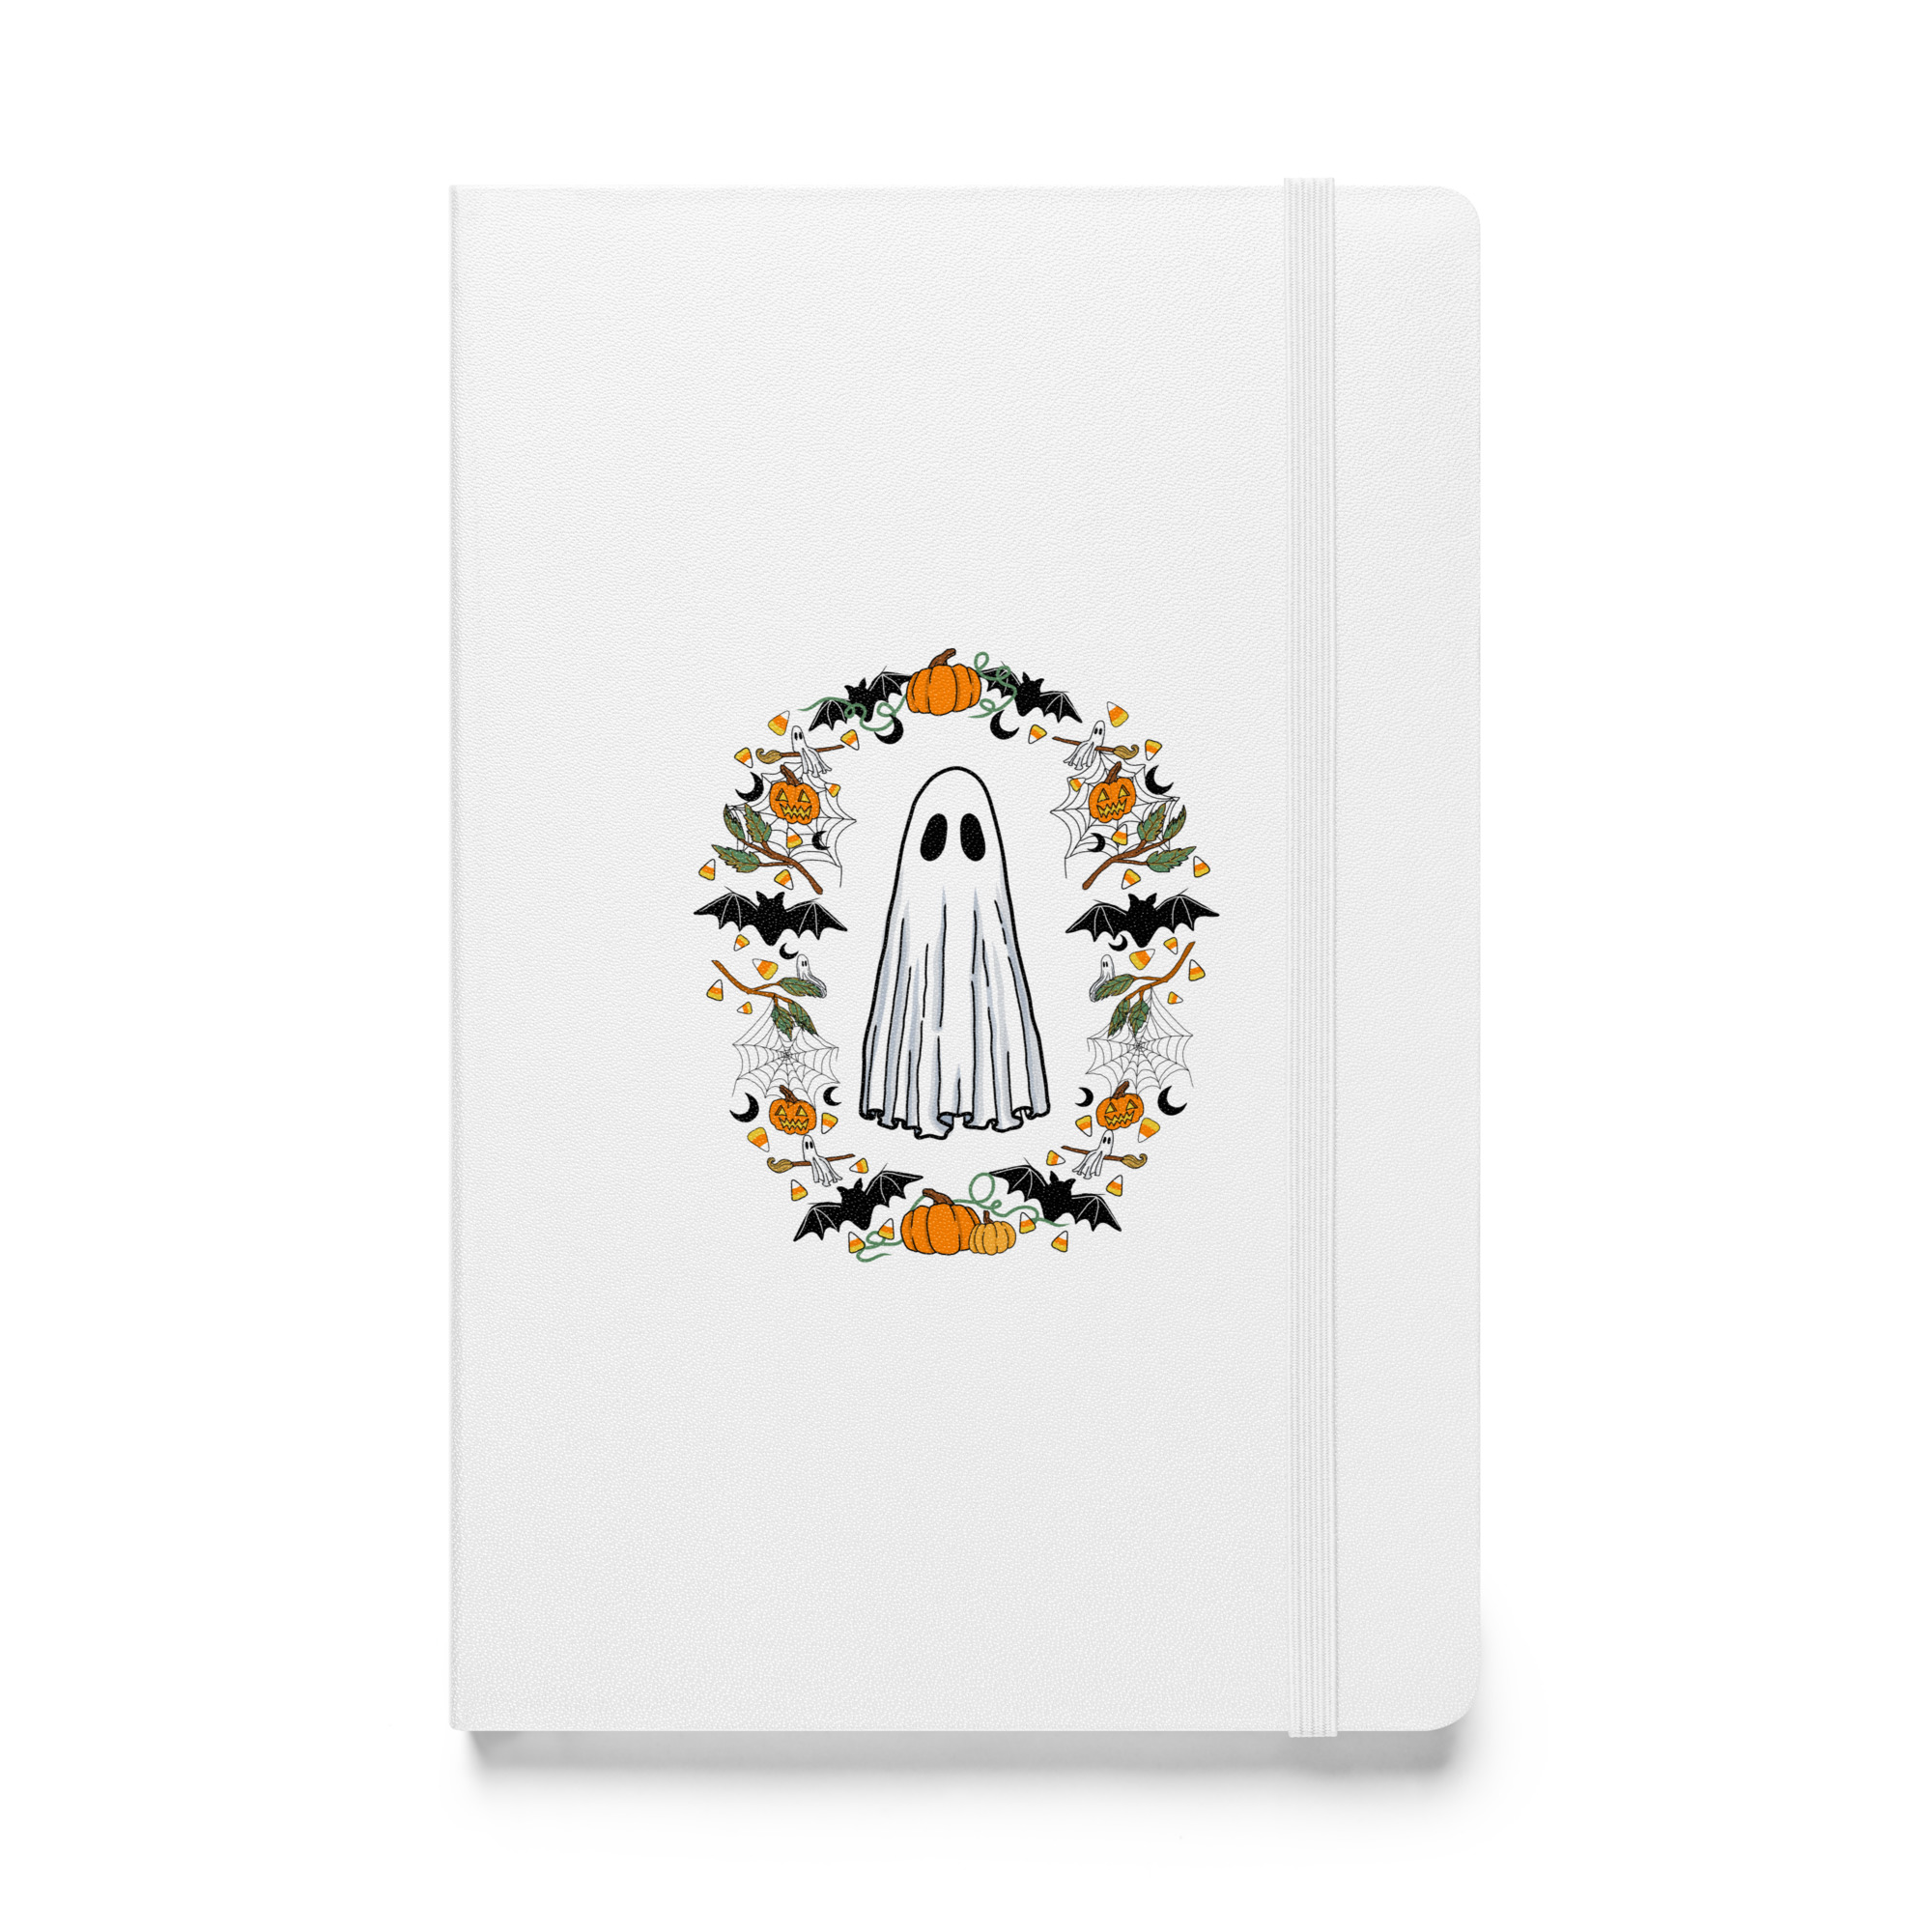 hardcover-bound-notebook-white-front-6537e62ae206a.jpg